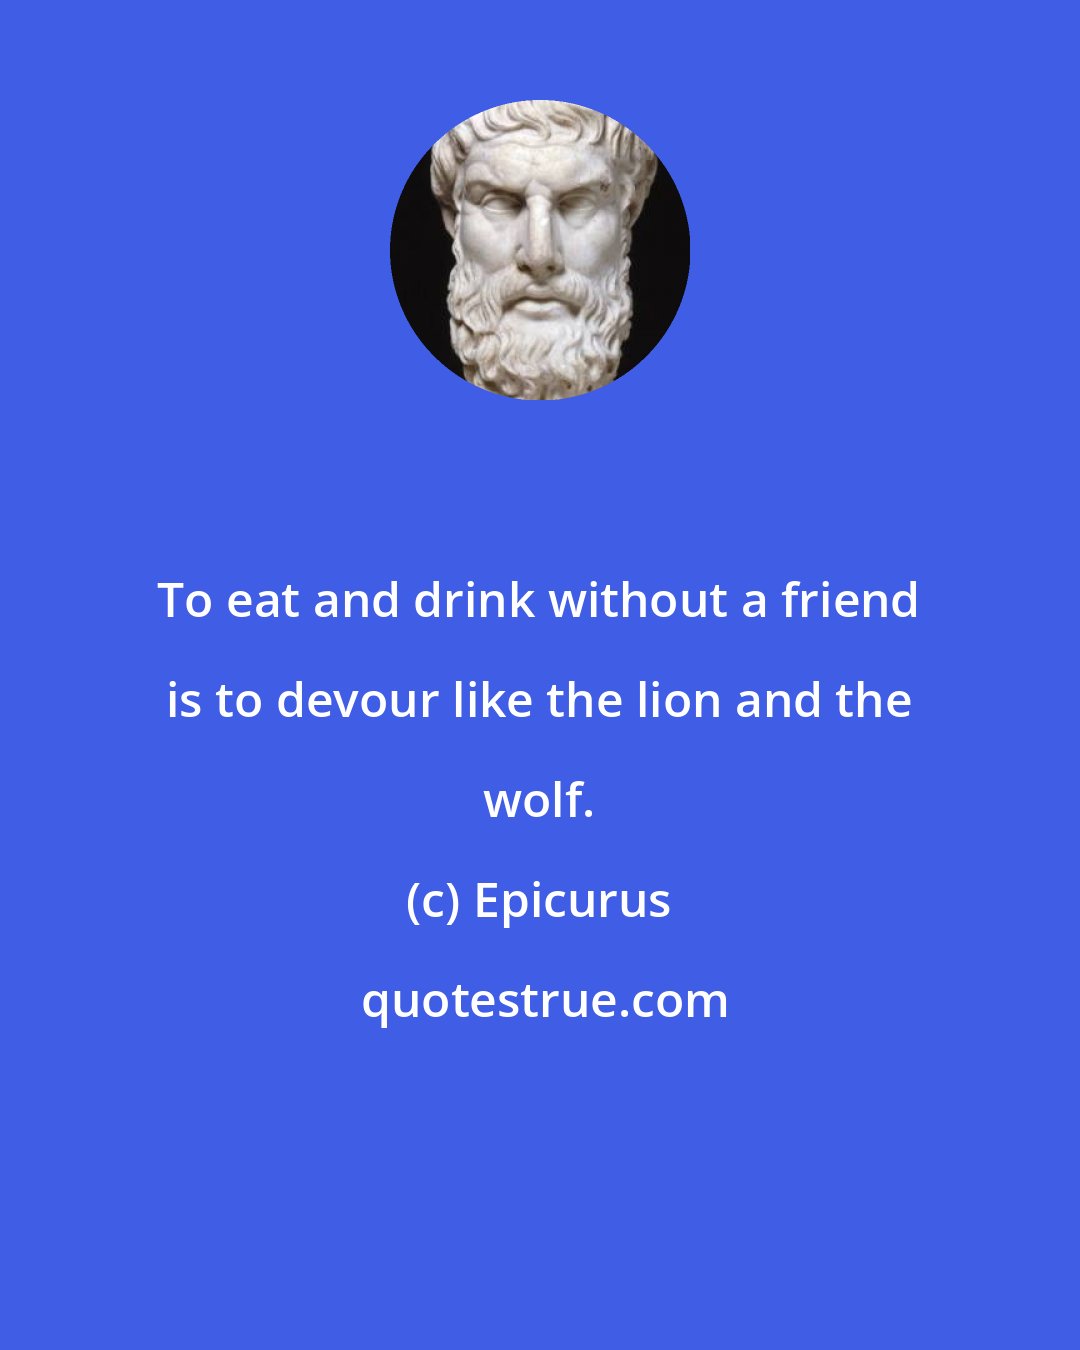 Epicurus: To eat and drink without a friend is to devour like the lion and the wolf.